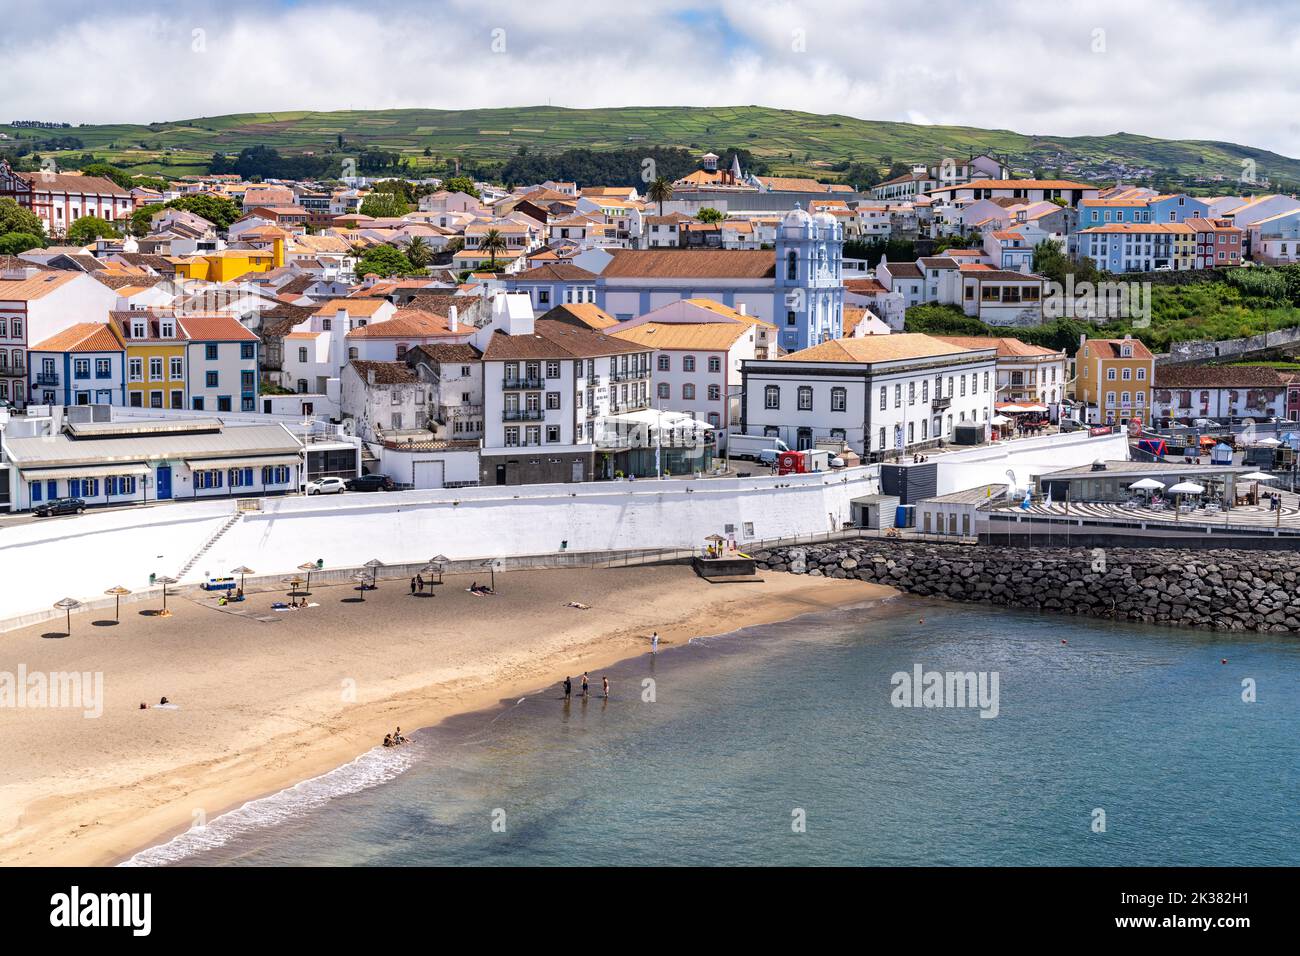 City view of the public beach called the Praia de Angra do Heroismo and city marina in the historic city centre of Angra do Heroismo, Terceira Island, Azores, Portugal. Stock Photo